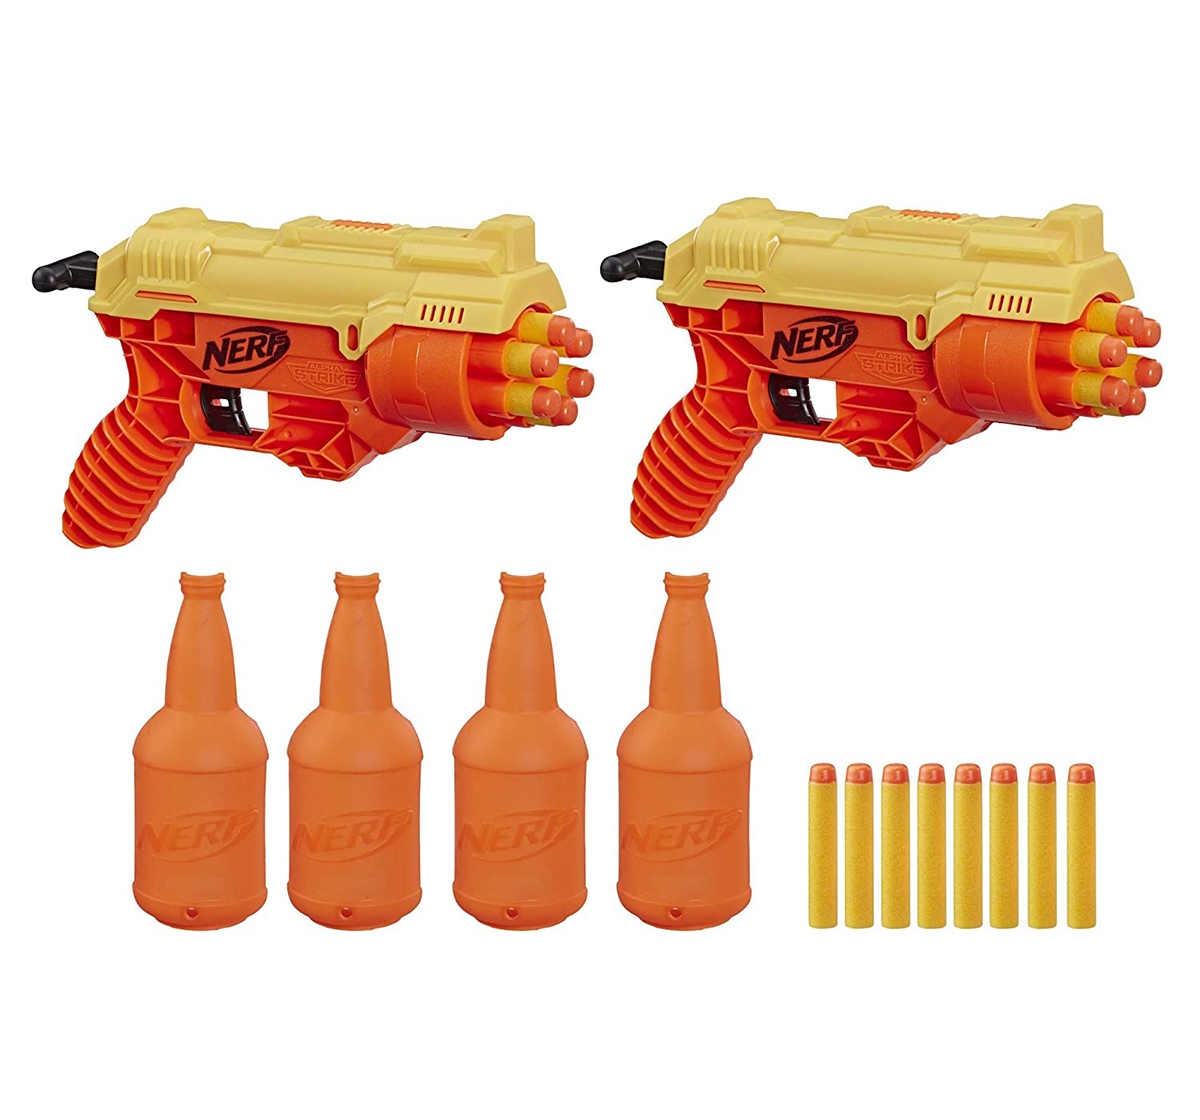 Nerf | NERF Alpha Strike 26-Piece Cobra RC-6 Dual Targeting Set, Includes 2 Toy Blasters, 4 Half-Targets, and 20 Official Nerf Elite Darts, Multicolor, 8Y+